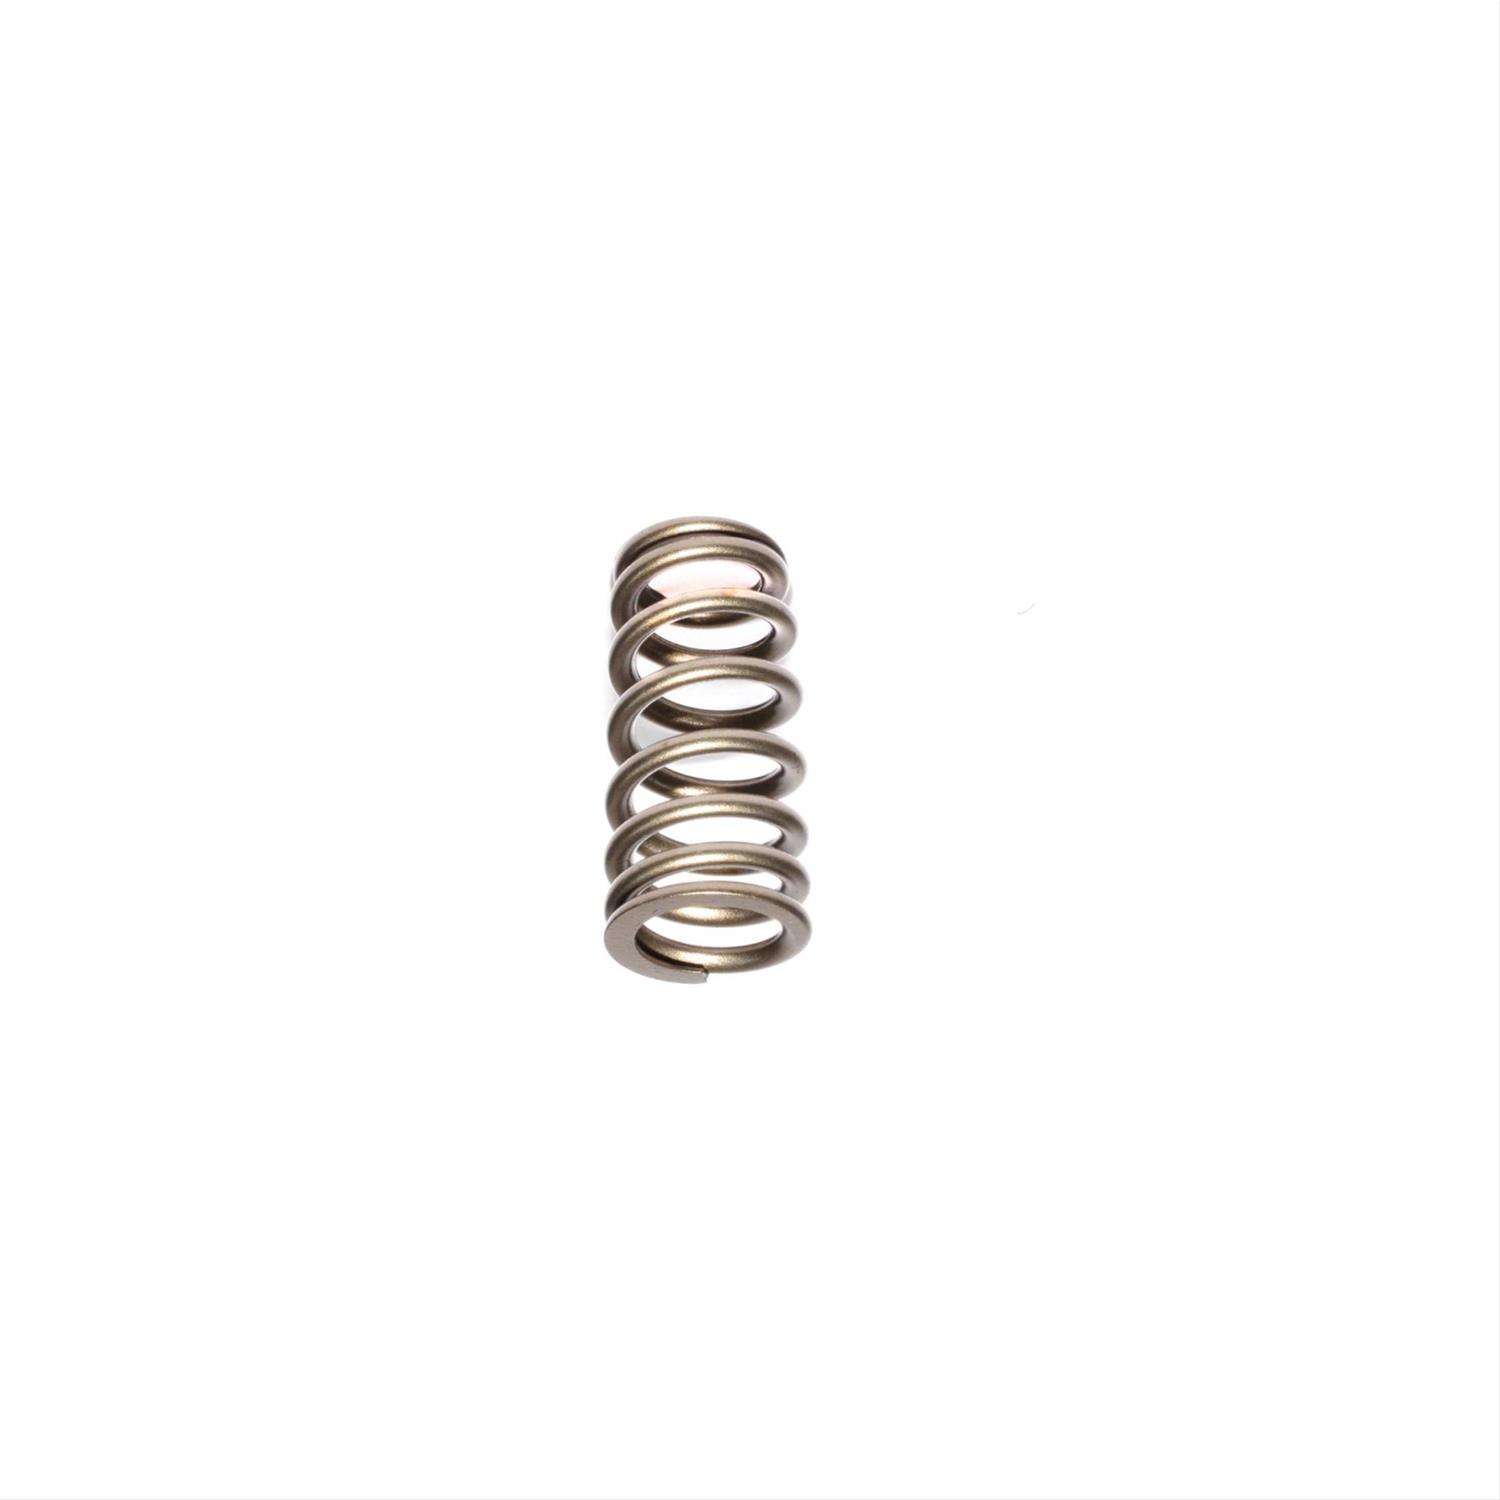 FORD 4.6L 2 VALVE BEEHIVE SPRING SINGLE .550 LIFT